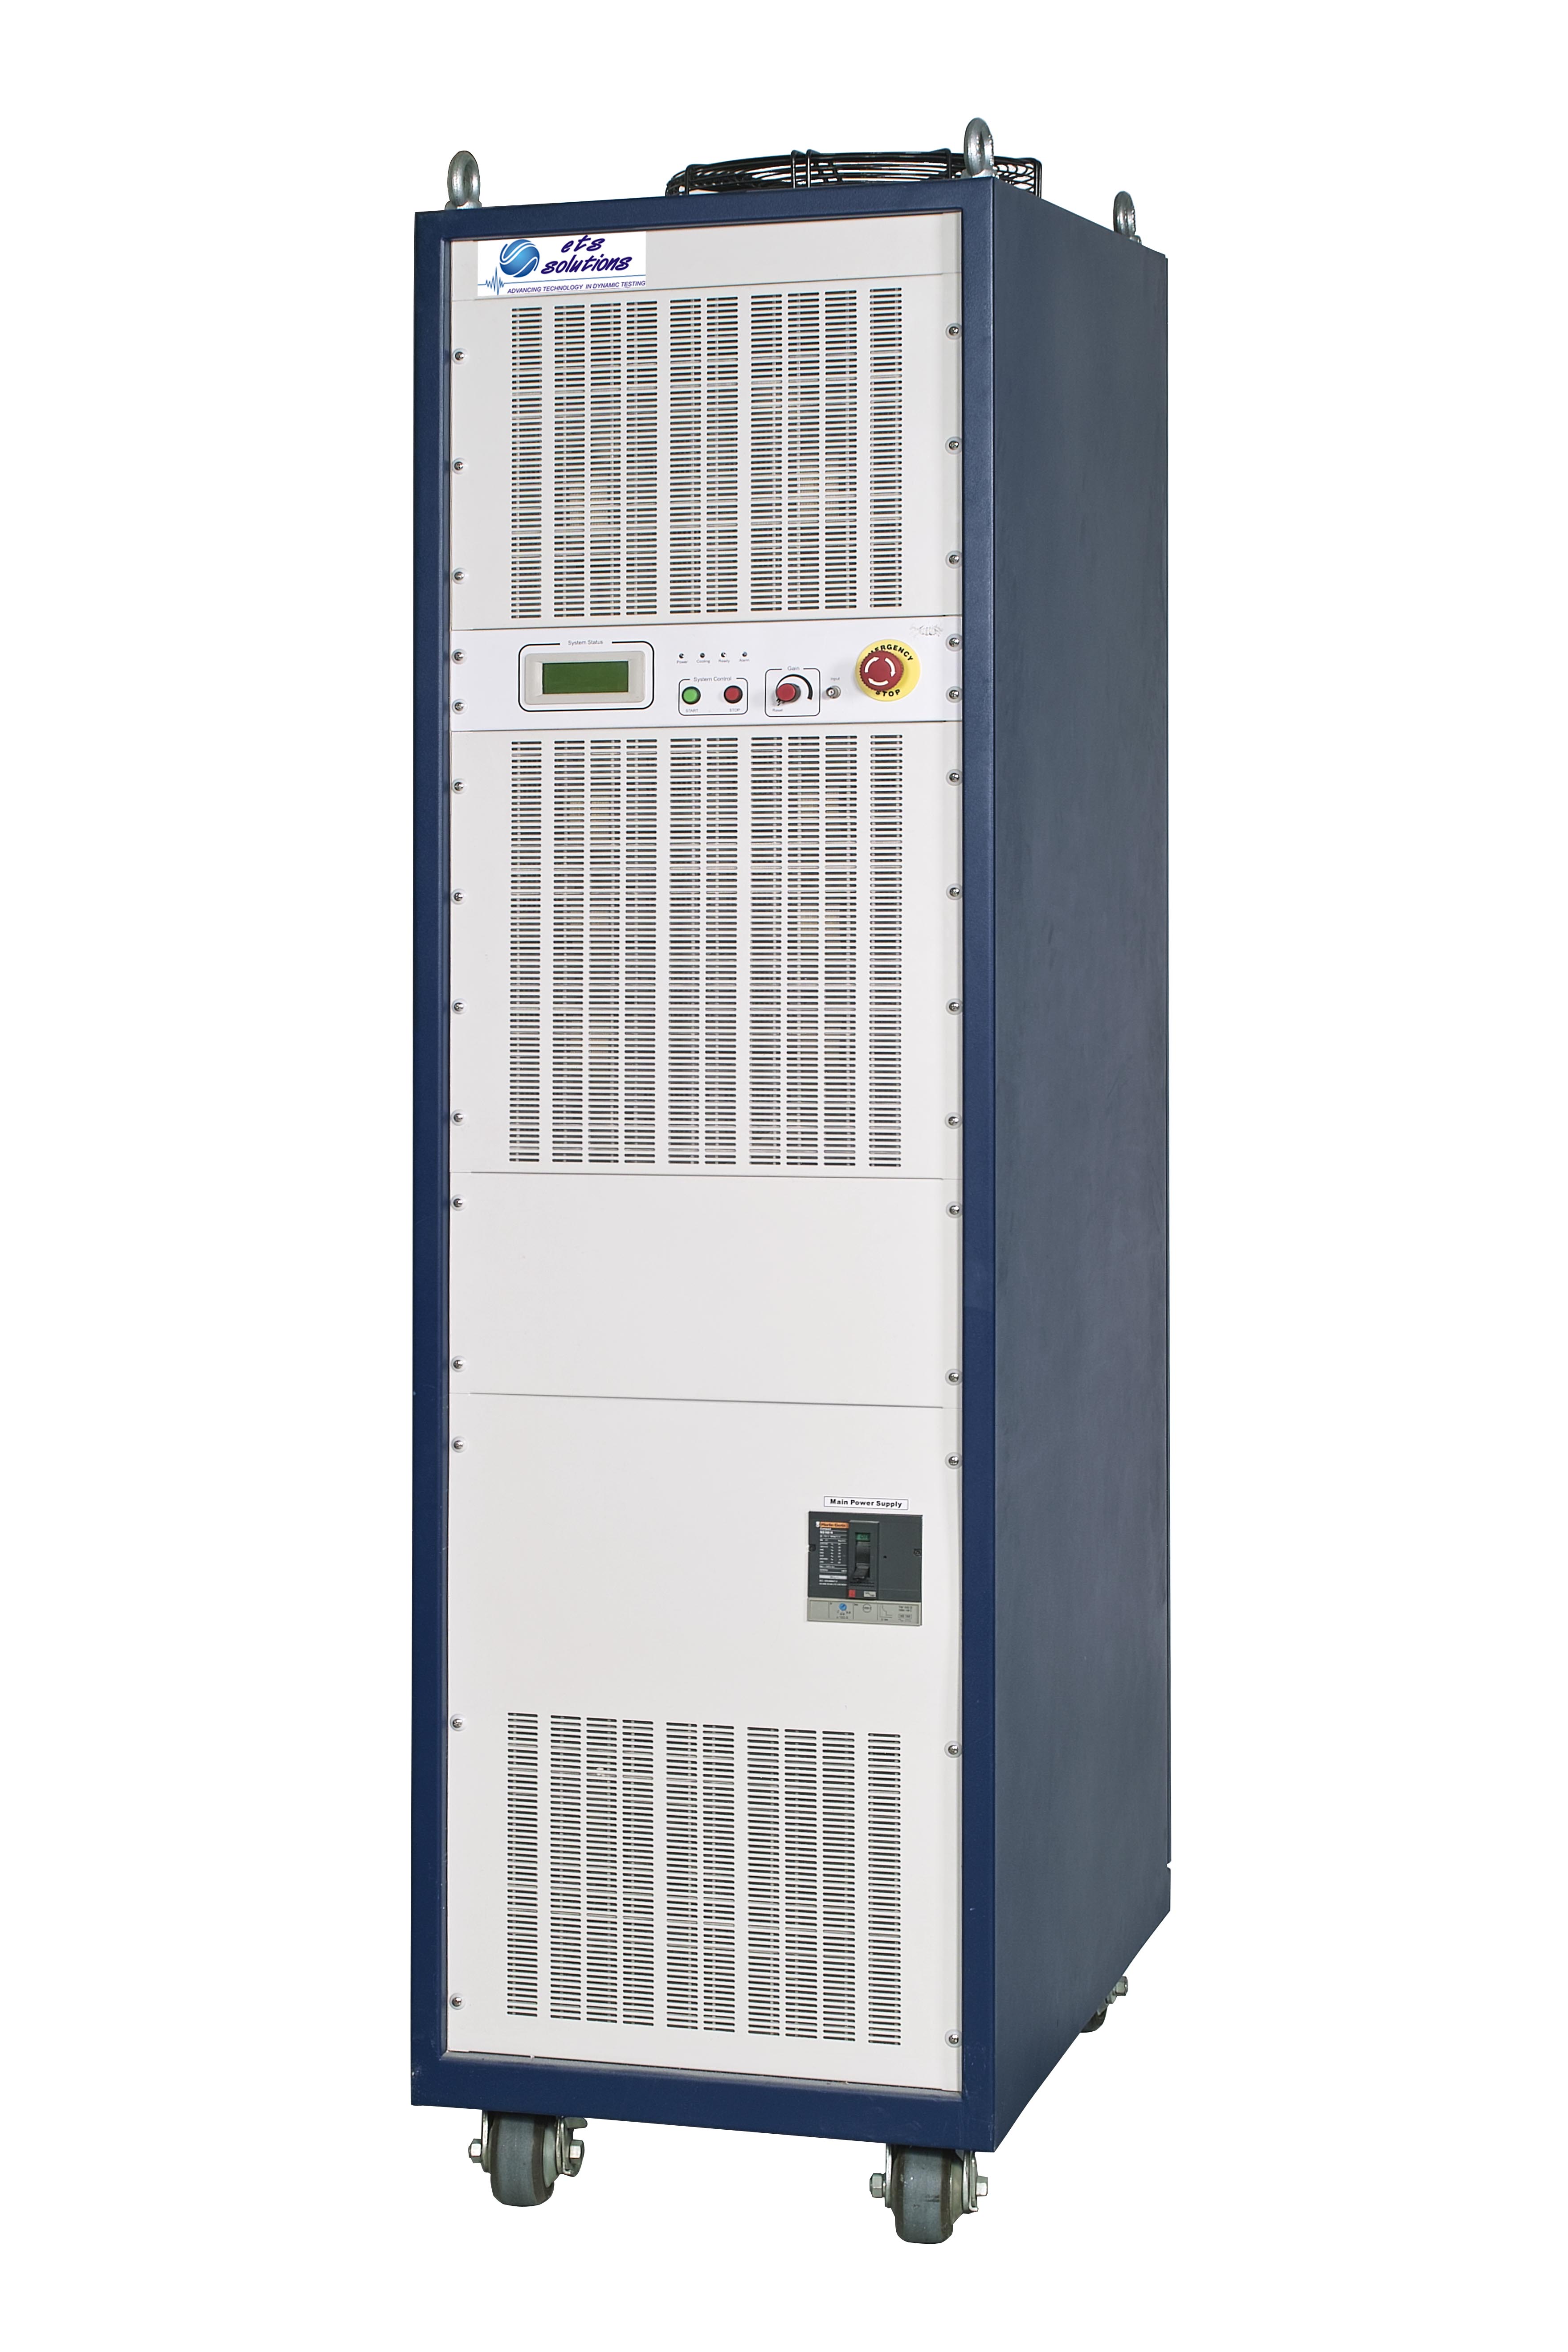 Cabinets: 1,
Max Power Output: 49kVA to 84kVA,
Max Output Voltage: 120V,
Max Output Current: 700A